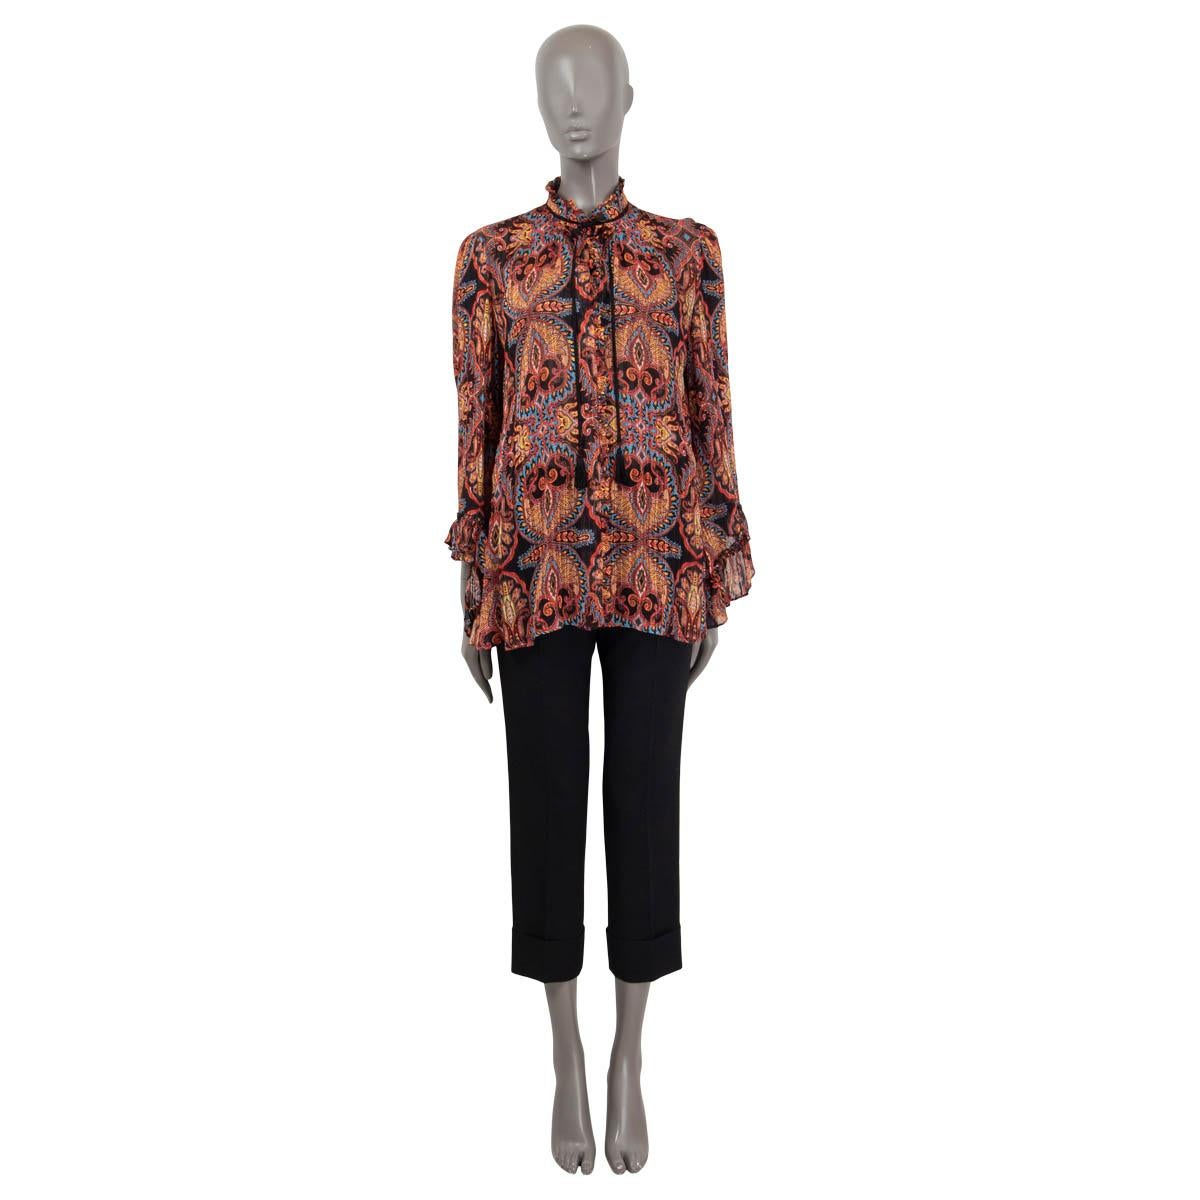 100% authentic Etro paisley printed blouse in black, red, orange, yellow and blue viscose (59%) and cotton (41%). Features rouched bell sleeves and a black tassel tie around the neck. Unlined. Has been worn and is in excellent condition.